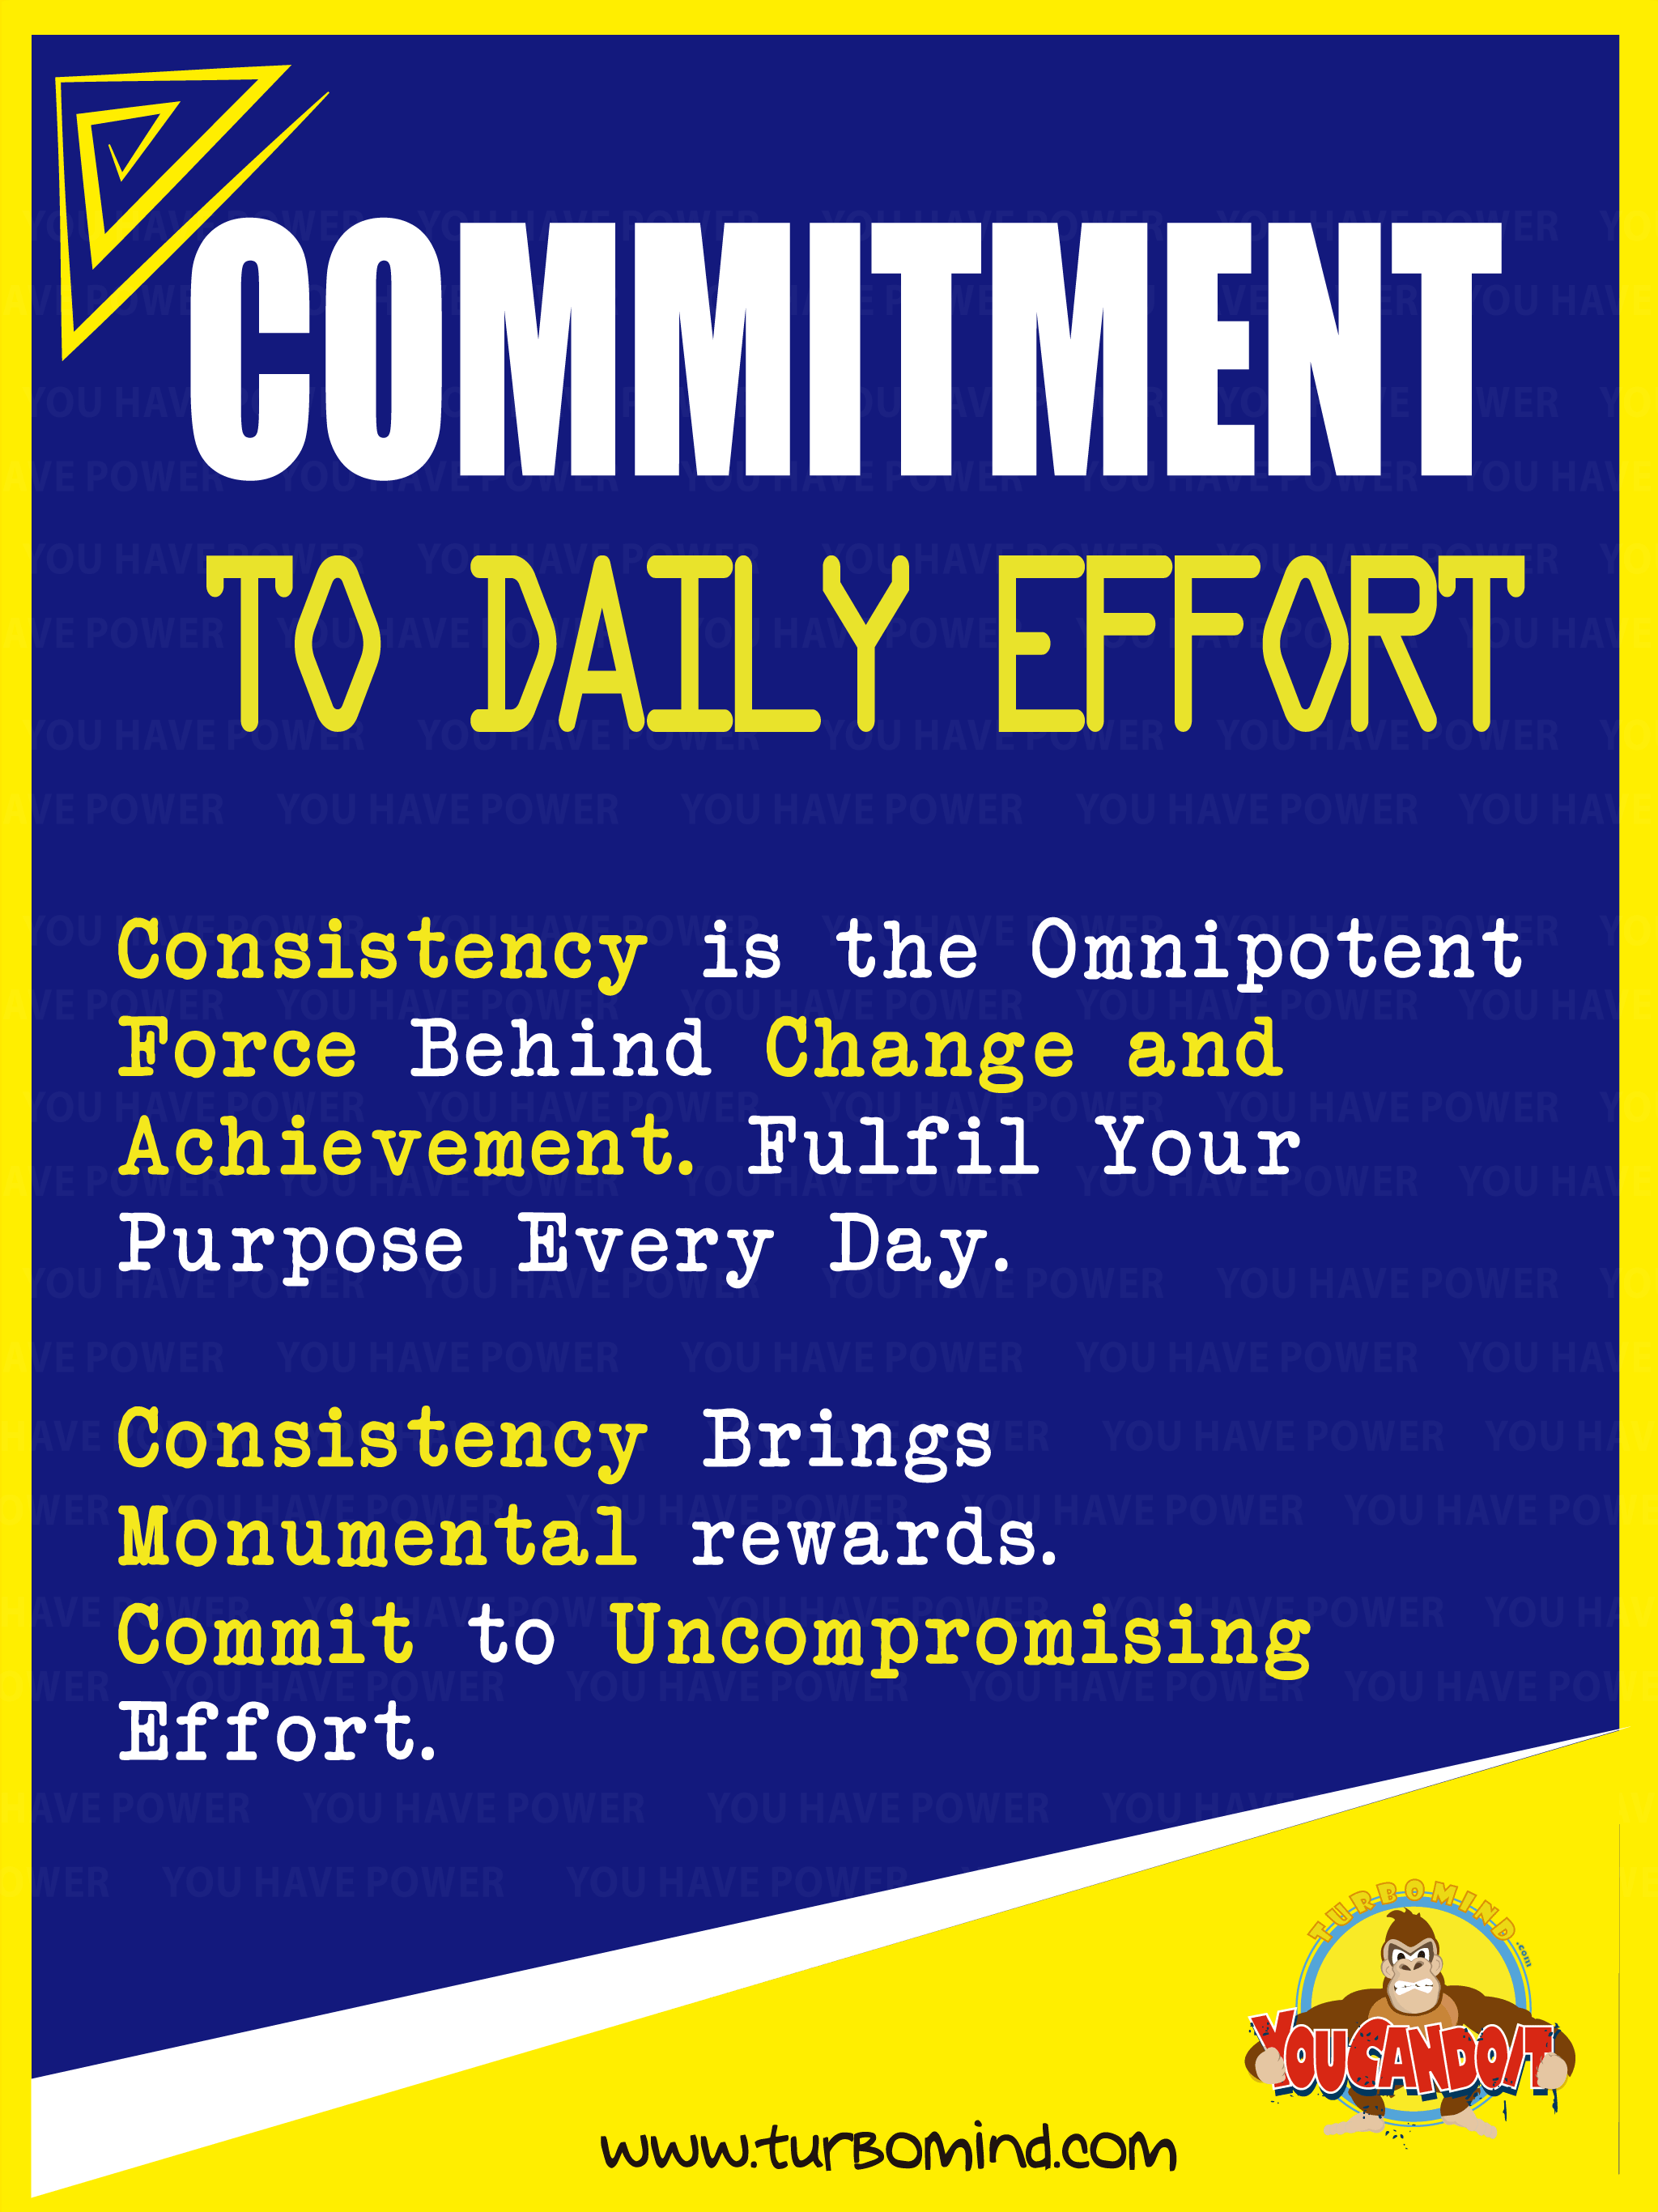 COMMIT TO DAILY EFFORT